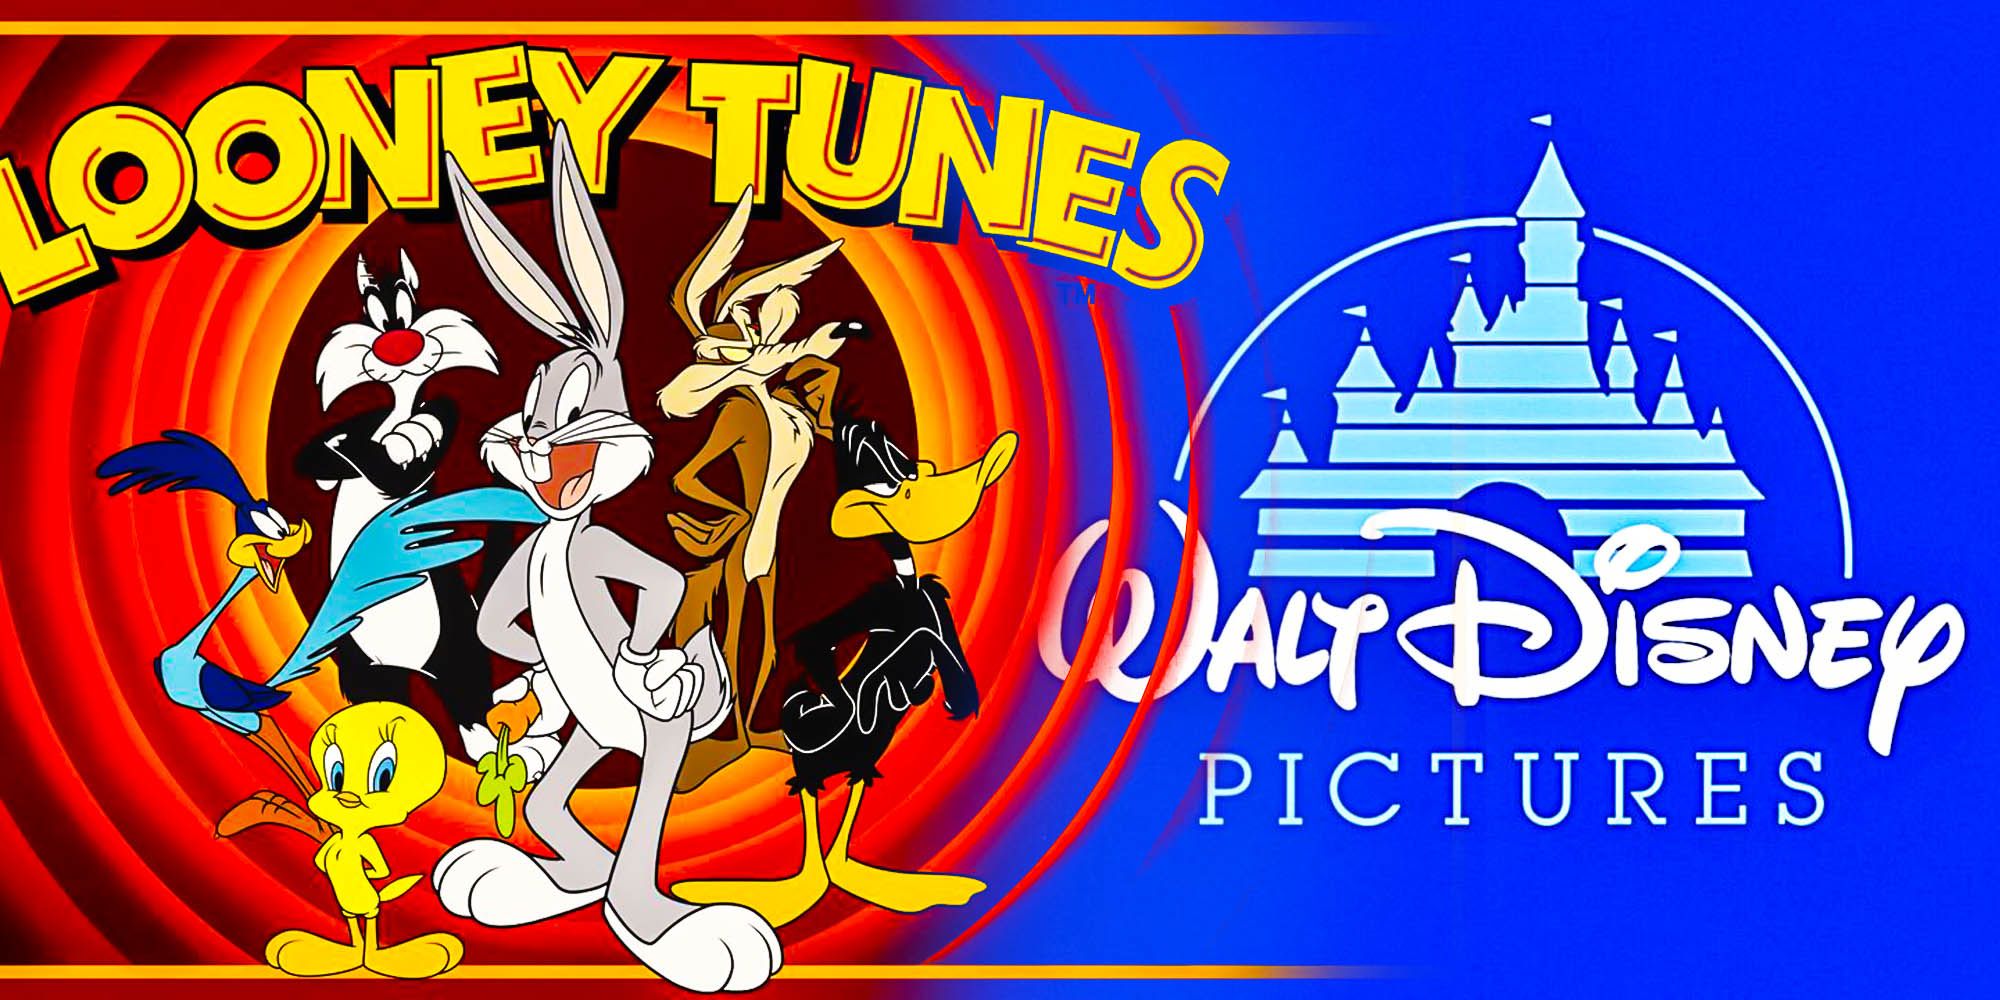 why its called Looney tunes thanks to disney